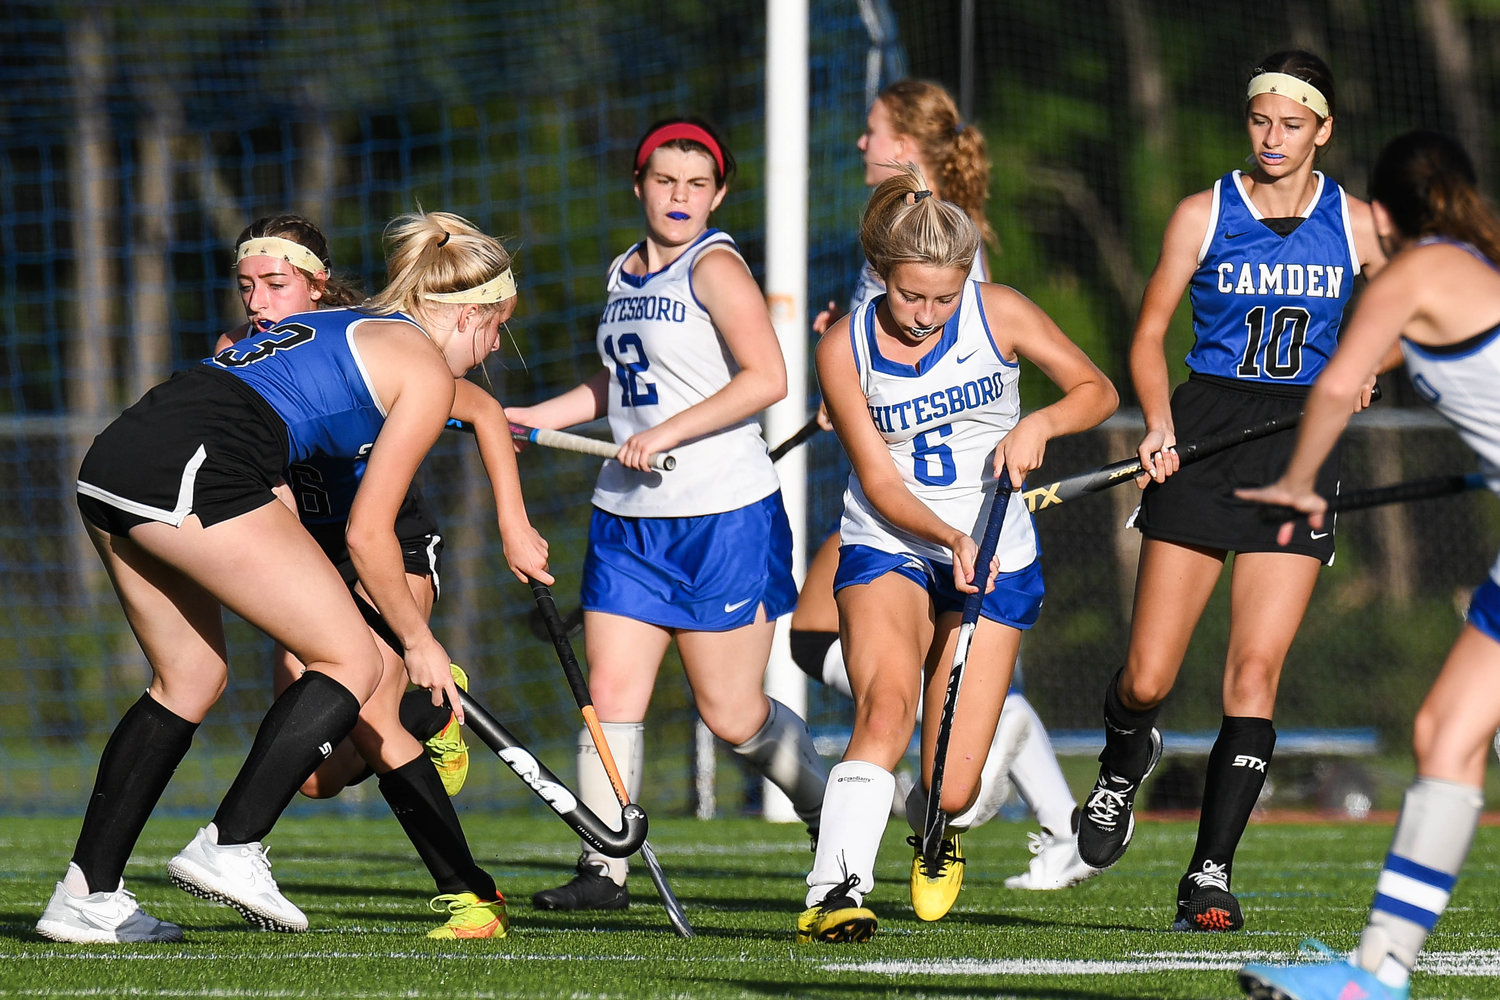 Whitesboro player Brianna DeHimer (6) moves the ball against Camden players Emily Bird (3) and Avery Prievo (10) during the field hockey game on Wednesday.